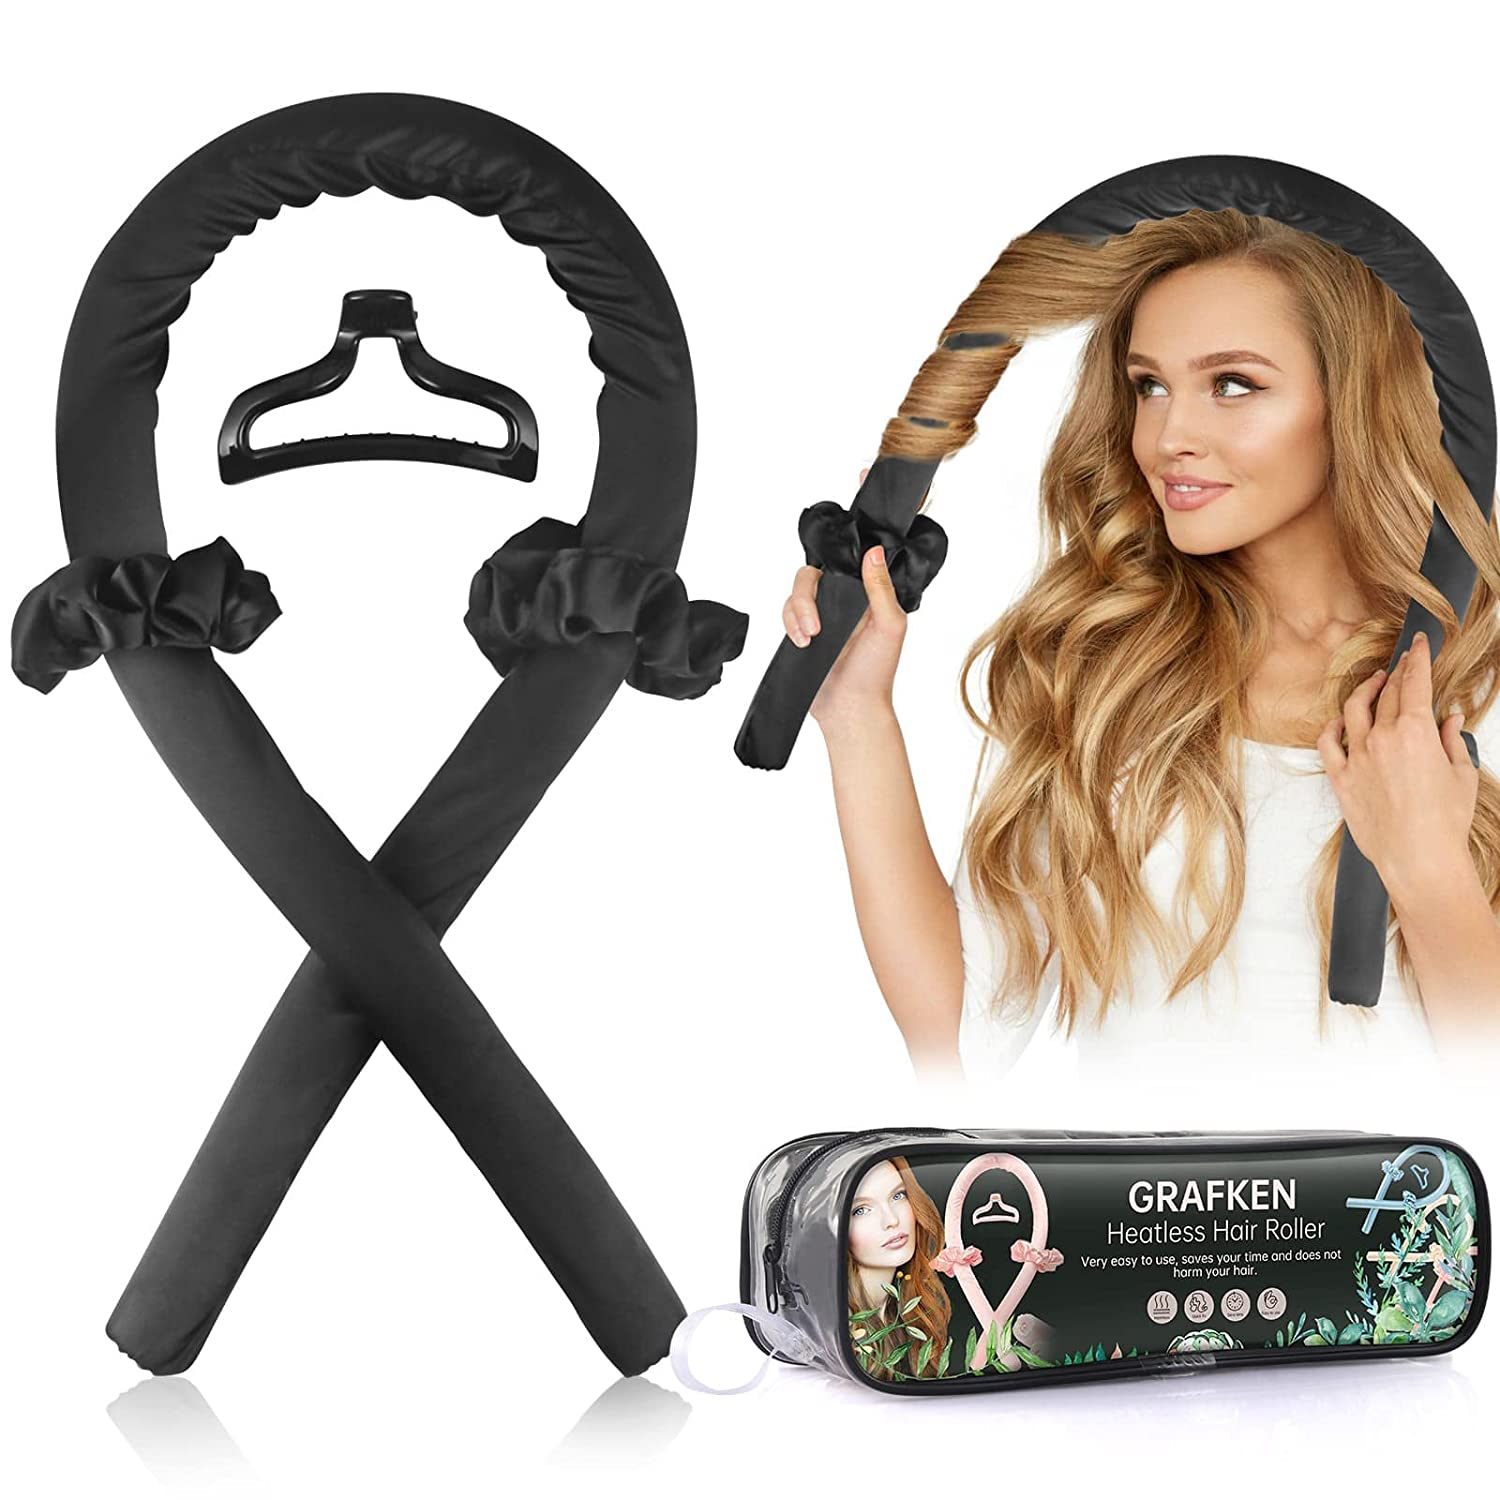 Heatless Curling Rod Headband, No Heat silk curlers hair rollers for long hair and you can sleep in soft foam hair curlers curling rods overnight, curling ribbon and flexible rods for natural hair